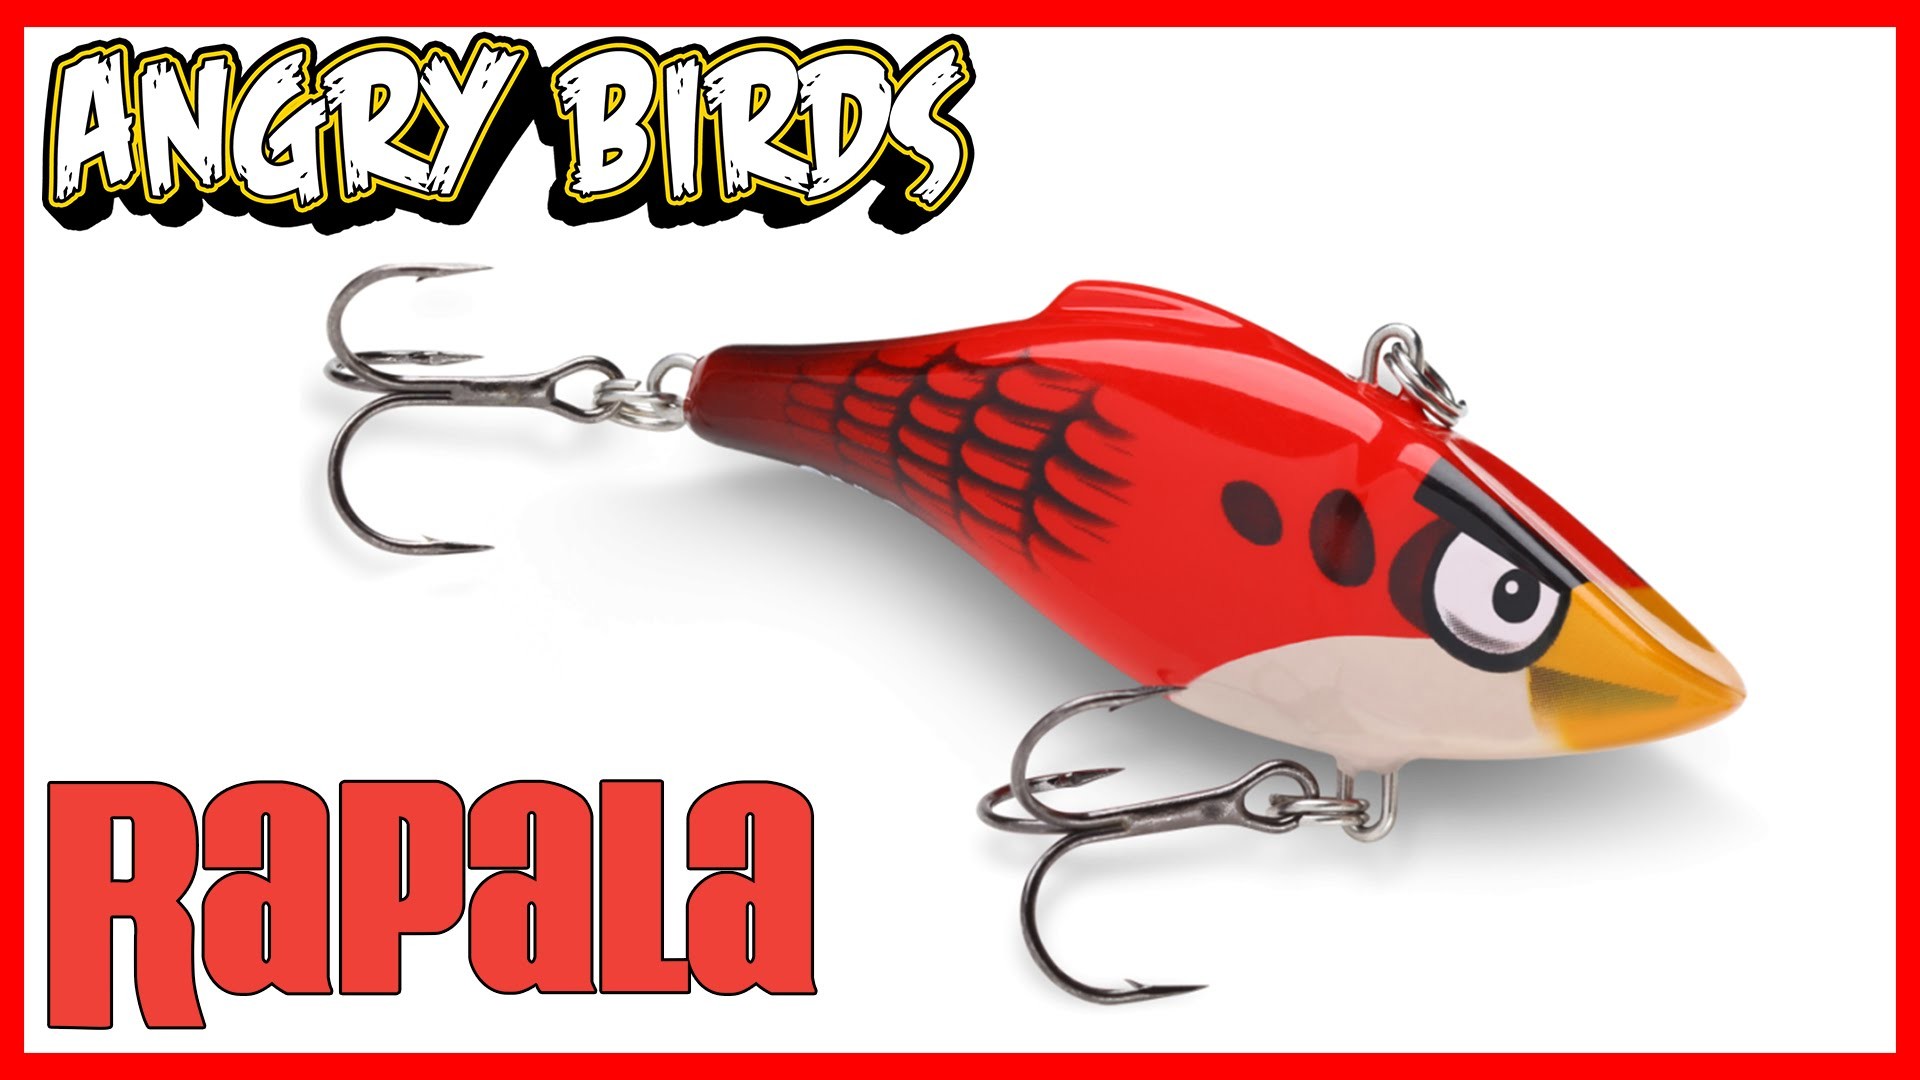 1920x1080 Rapala Angry Birds Fishing Lure [UNBOXING] "Rattlin' Red Bird" - YouTube